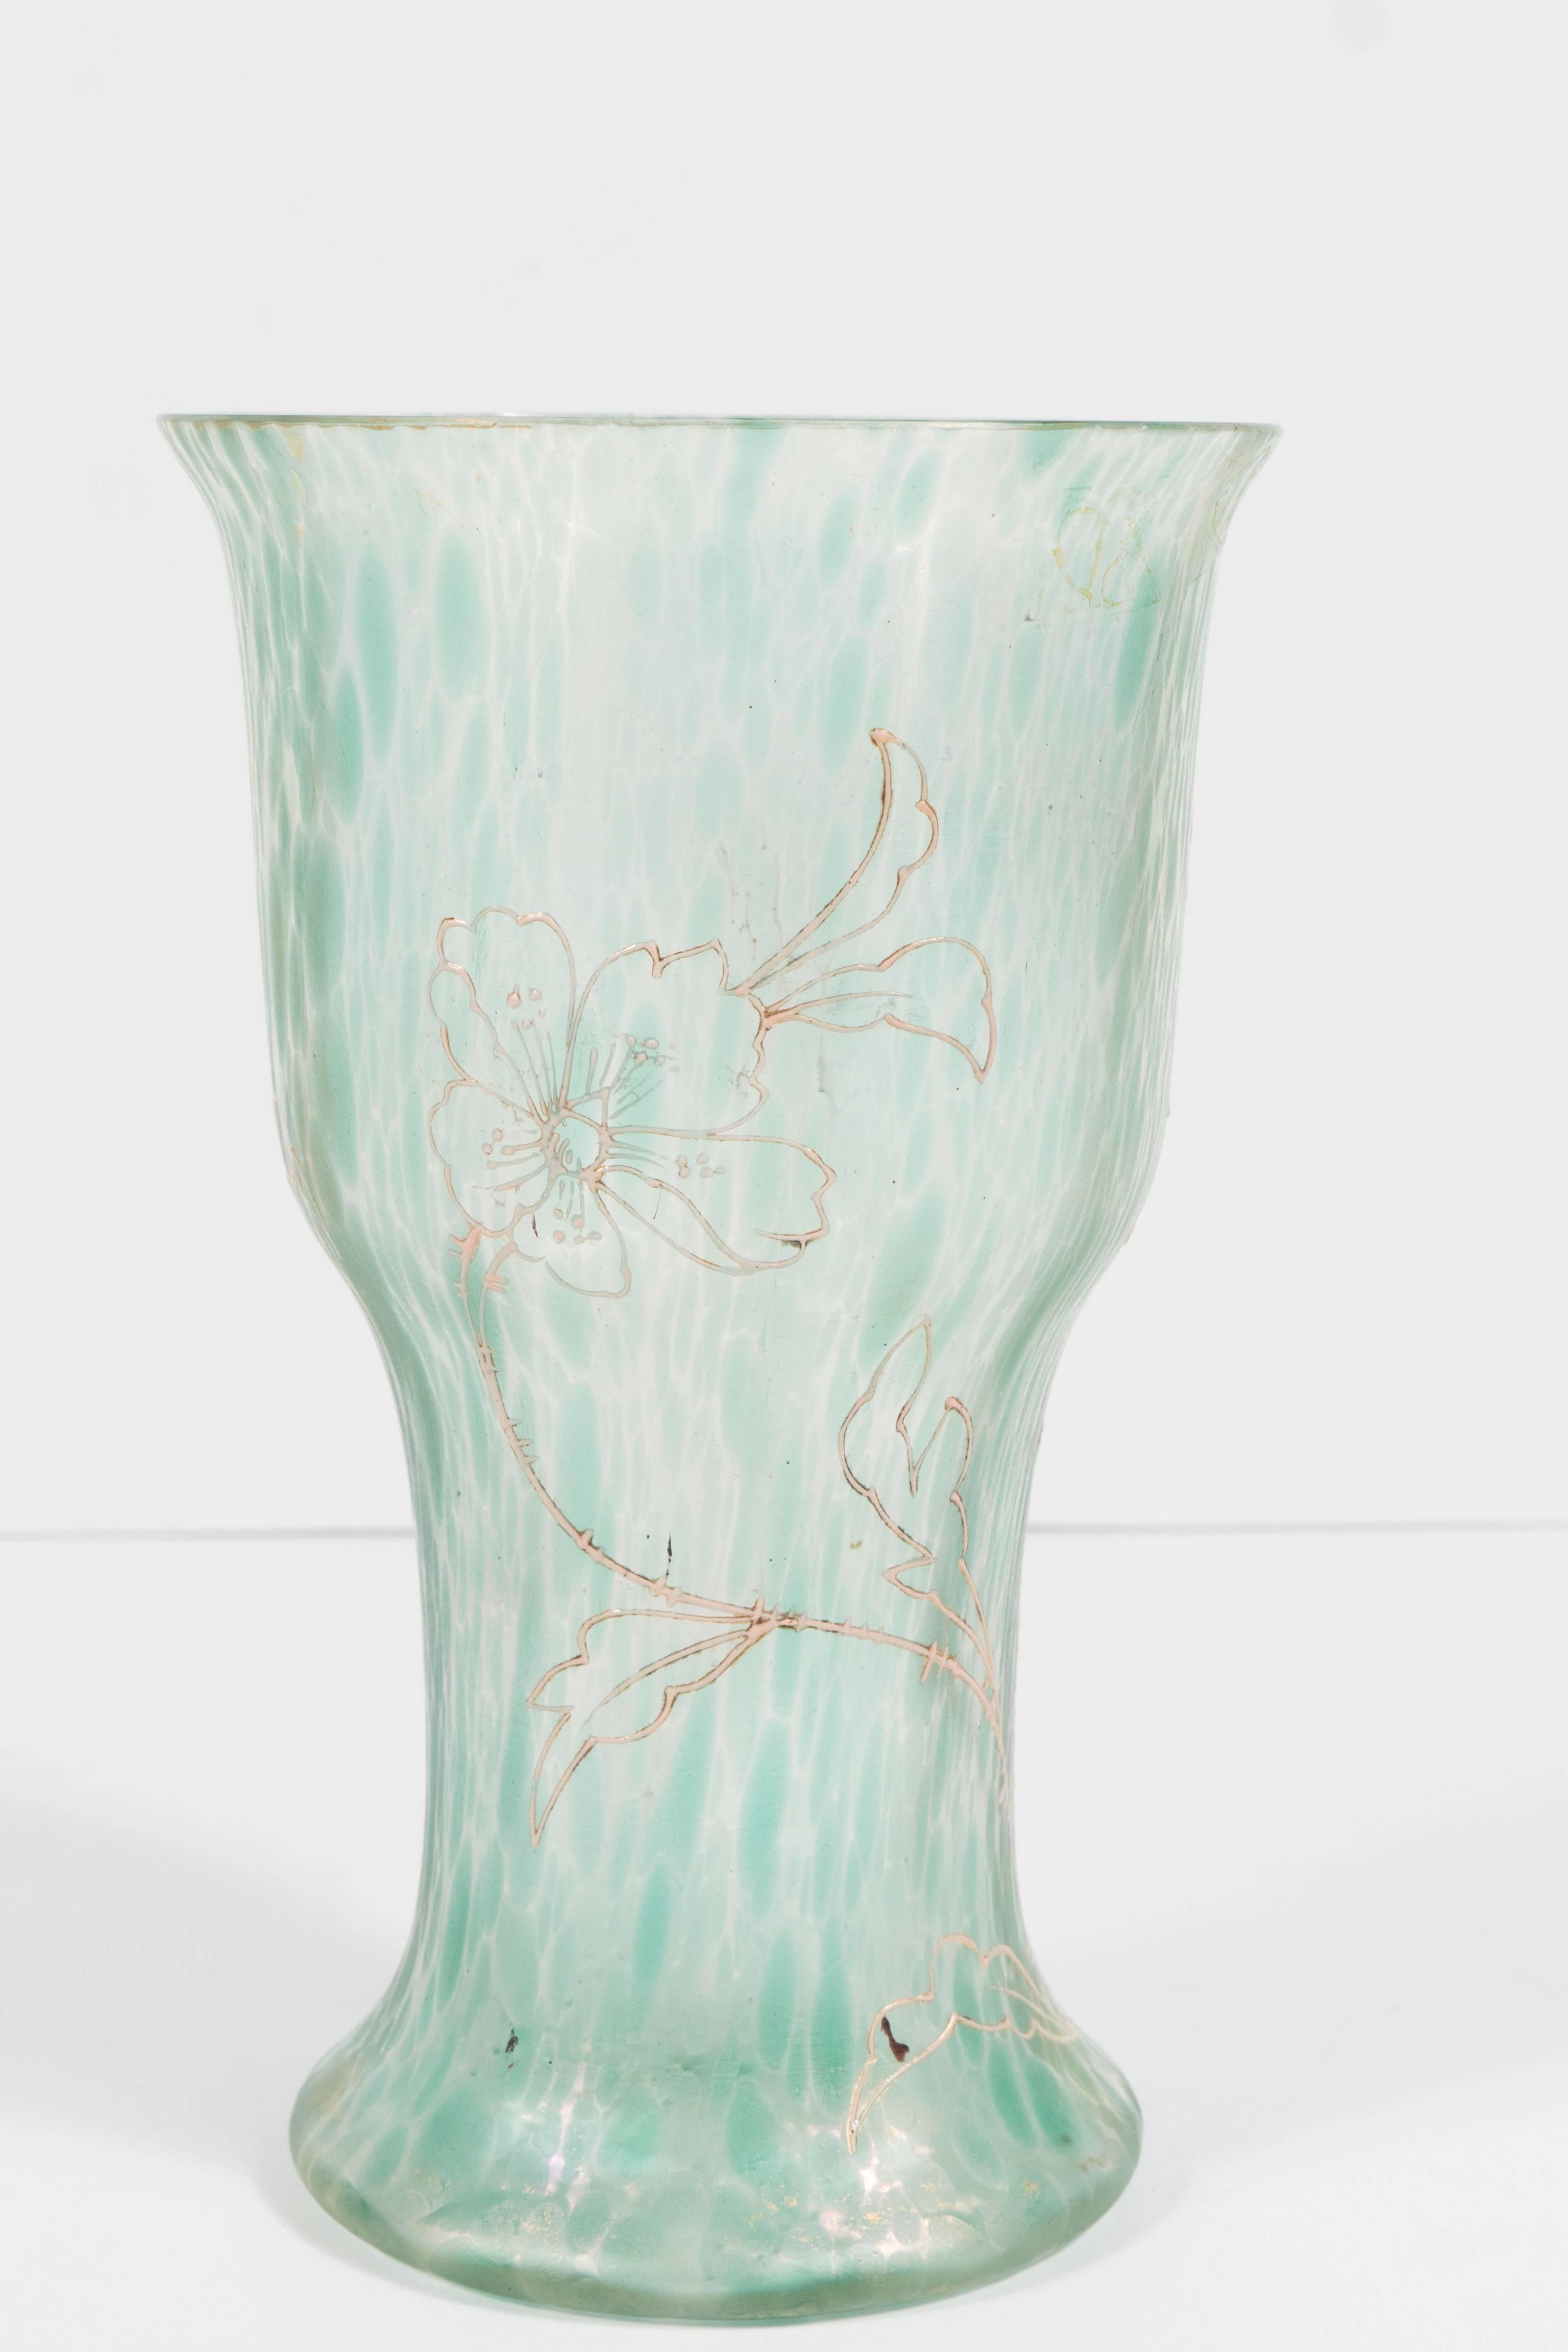 Early 20th Century Art Nouveau Austrian Art Glass Vase in Green Iridescent and Gold Relief Vine